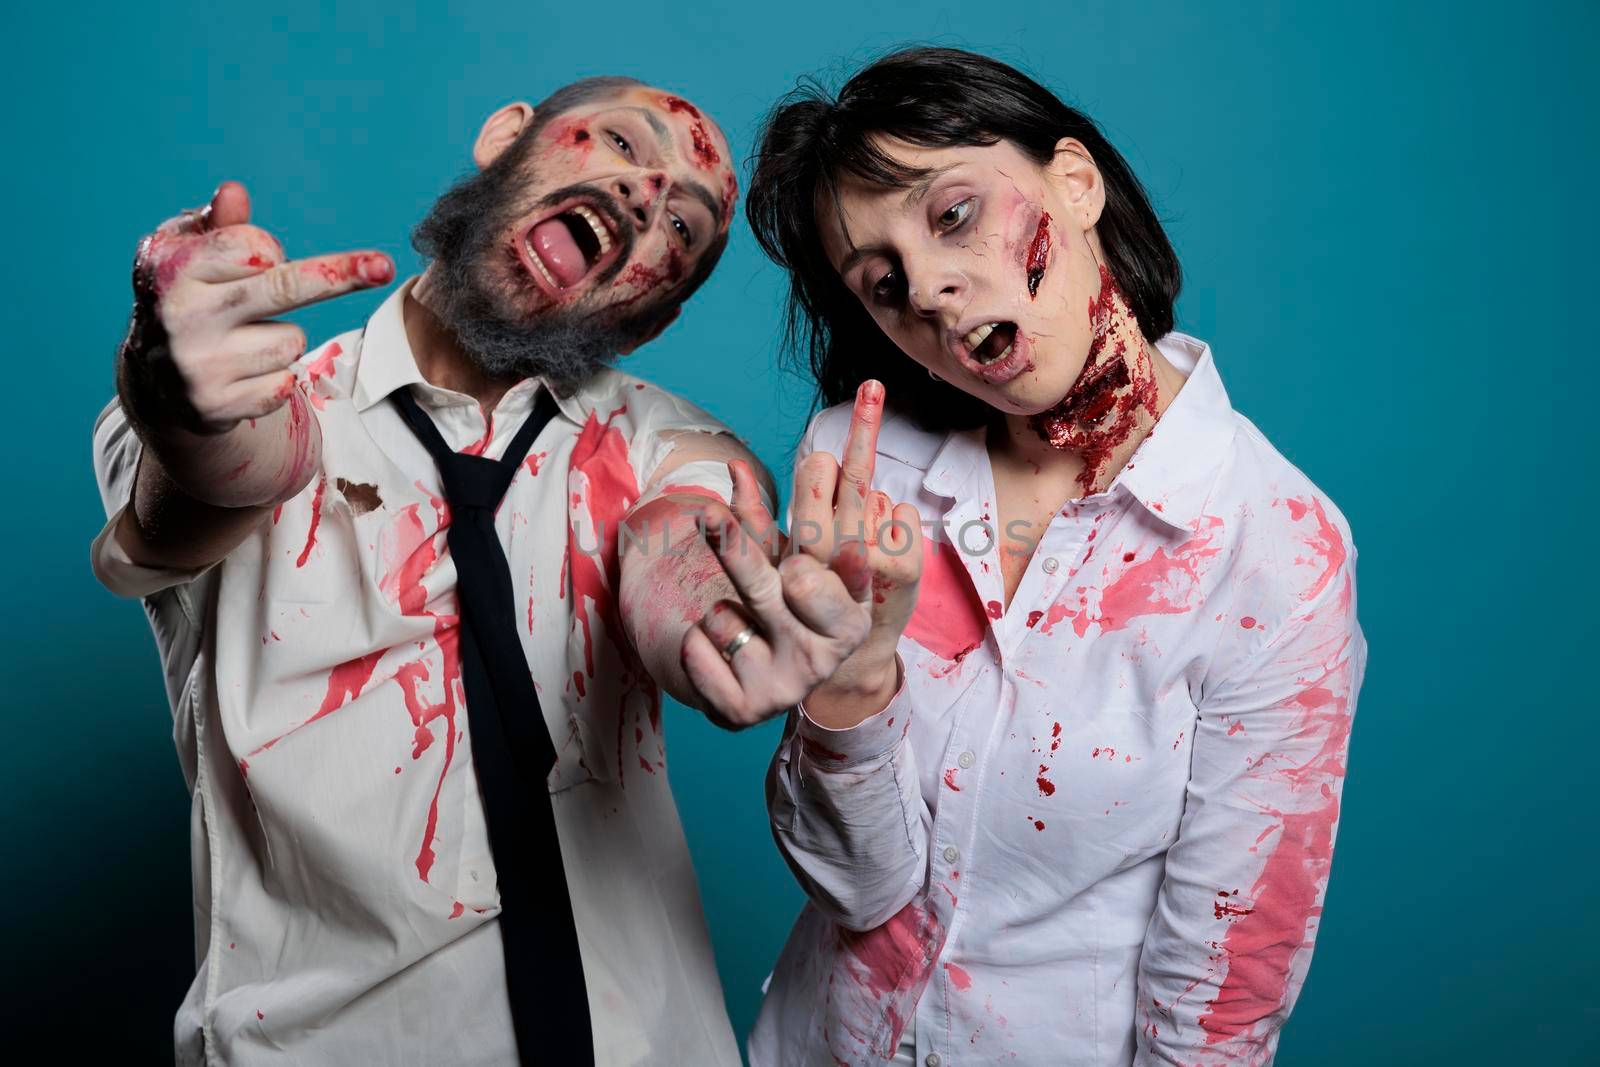 Aggressive halloween zombies showing middle finger on camera, acting vulgar and rude with mean gesture. Dangerouns creepy evil monsters with bloody wounds looking deadly and frightening.